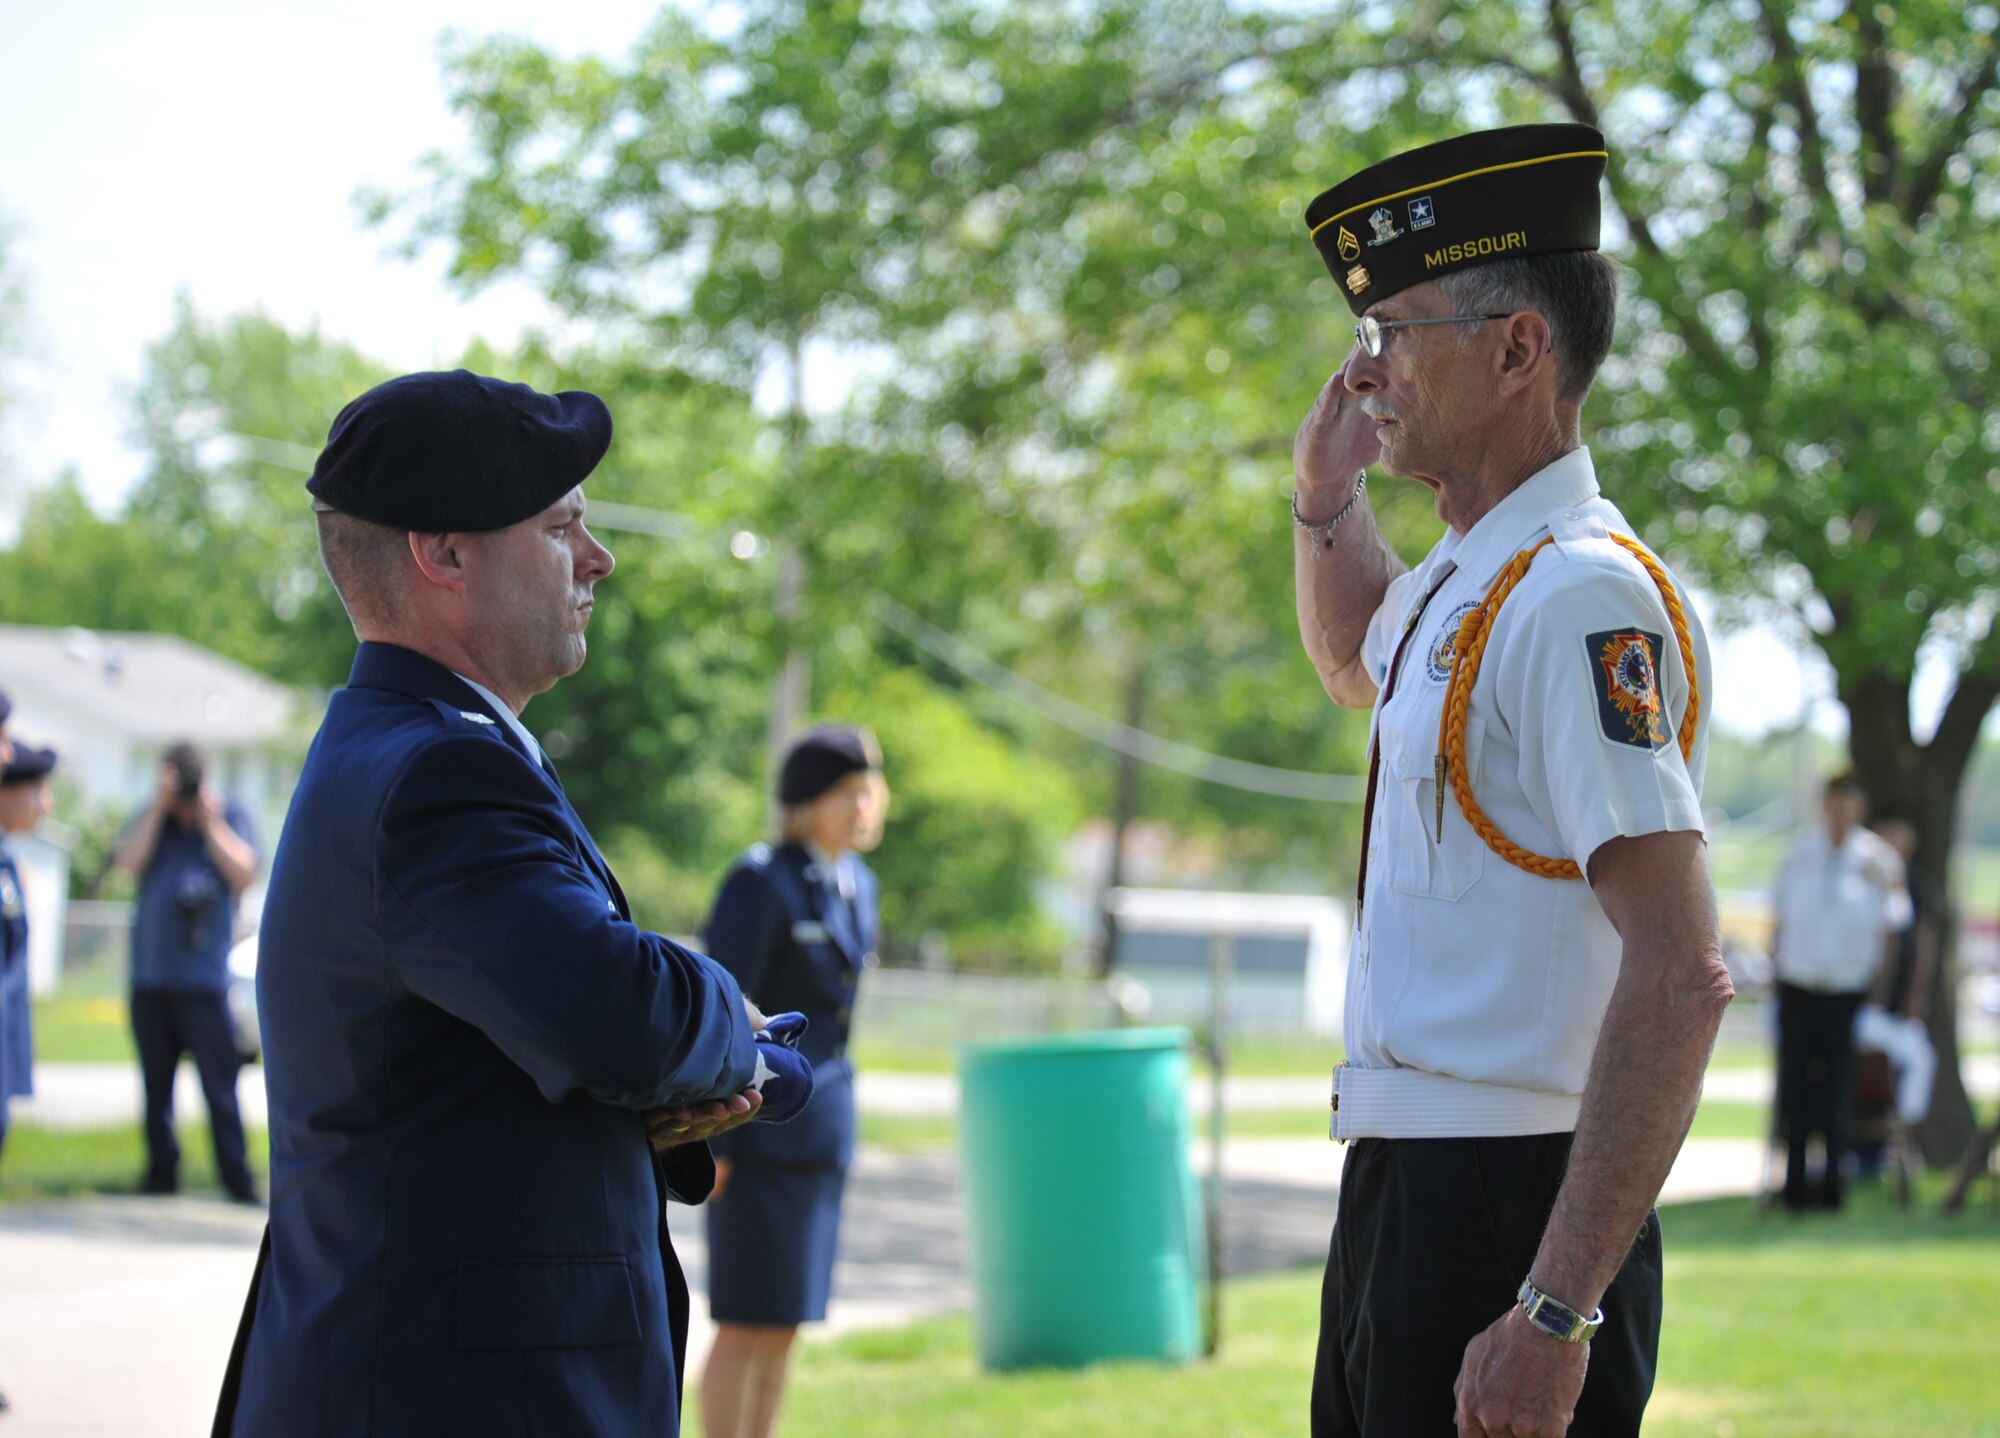 Joe Cochran, president of the local Veterans of Foreign Wars, salutes the flag held by Lt. Col. Christopher Neiman, 509th Security Forces Squadron commander, during a wreath-laying ceremony for 2nd Lt. George Whiteman May 18, 2013, in Sedalia, Mo. Whiteman, who was born in Sedalia in 1919, died during the attack on Pearl Harbor on Dec. 7, 1941. (U.S. Air Force photo by Senior Airman Brigitte N. Brantley/Released)